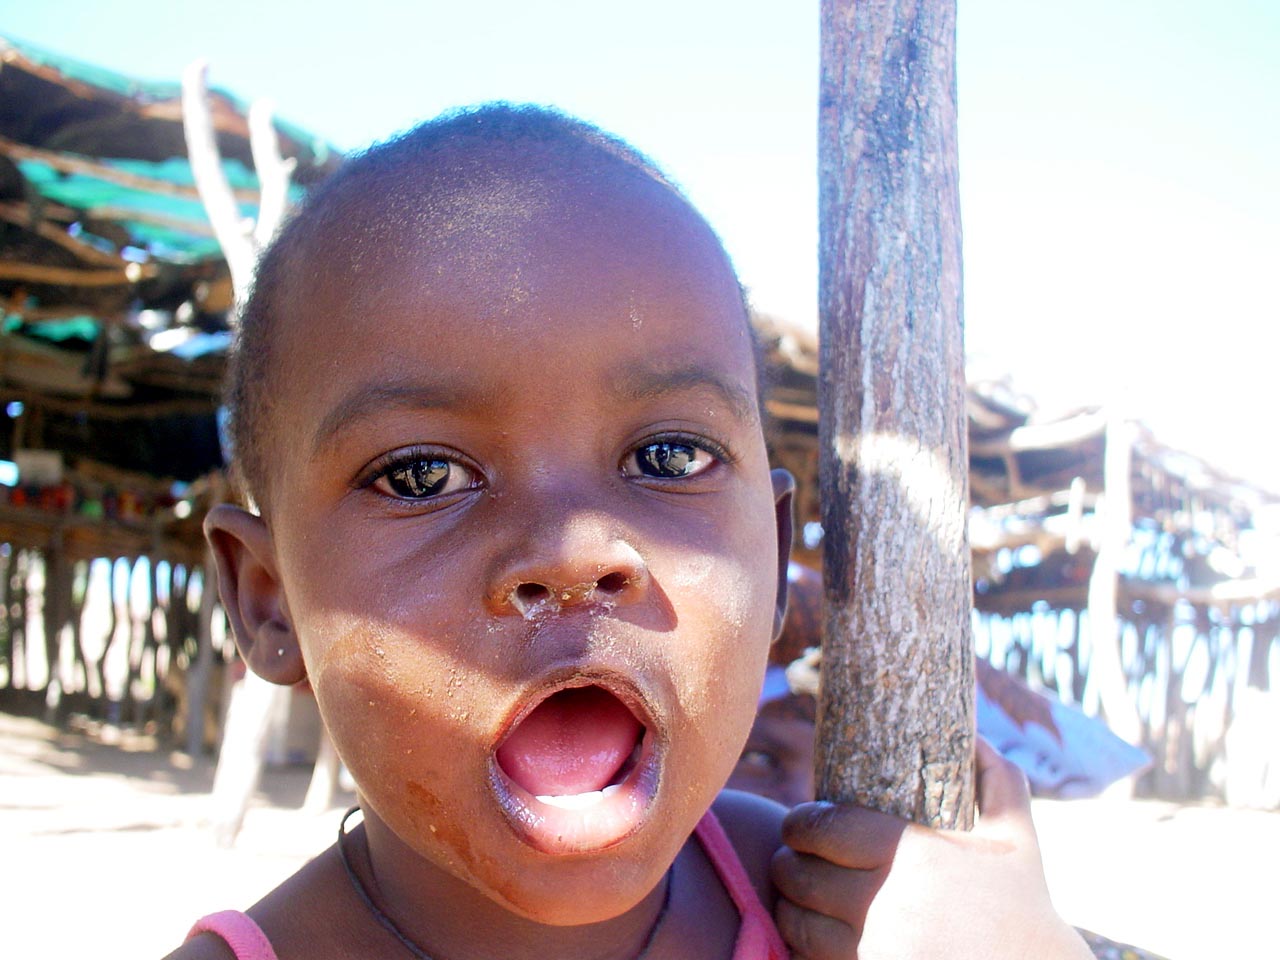 Child from Namibia